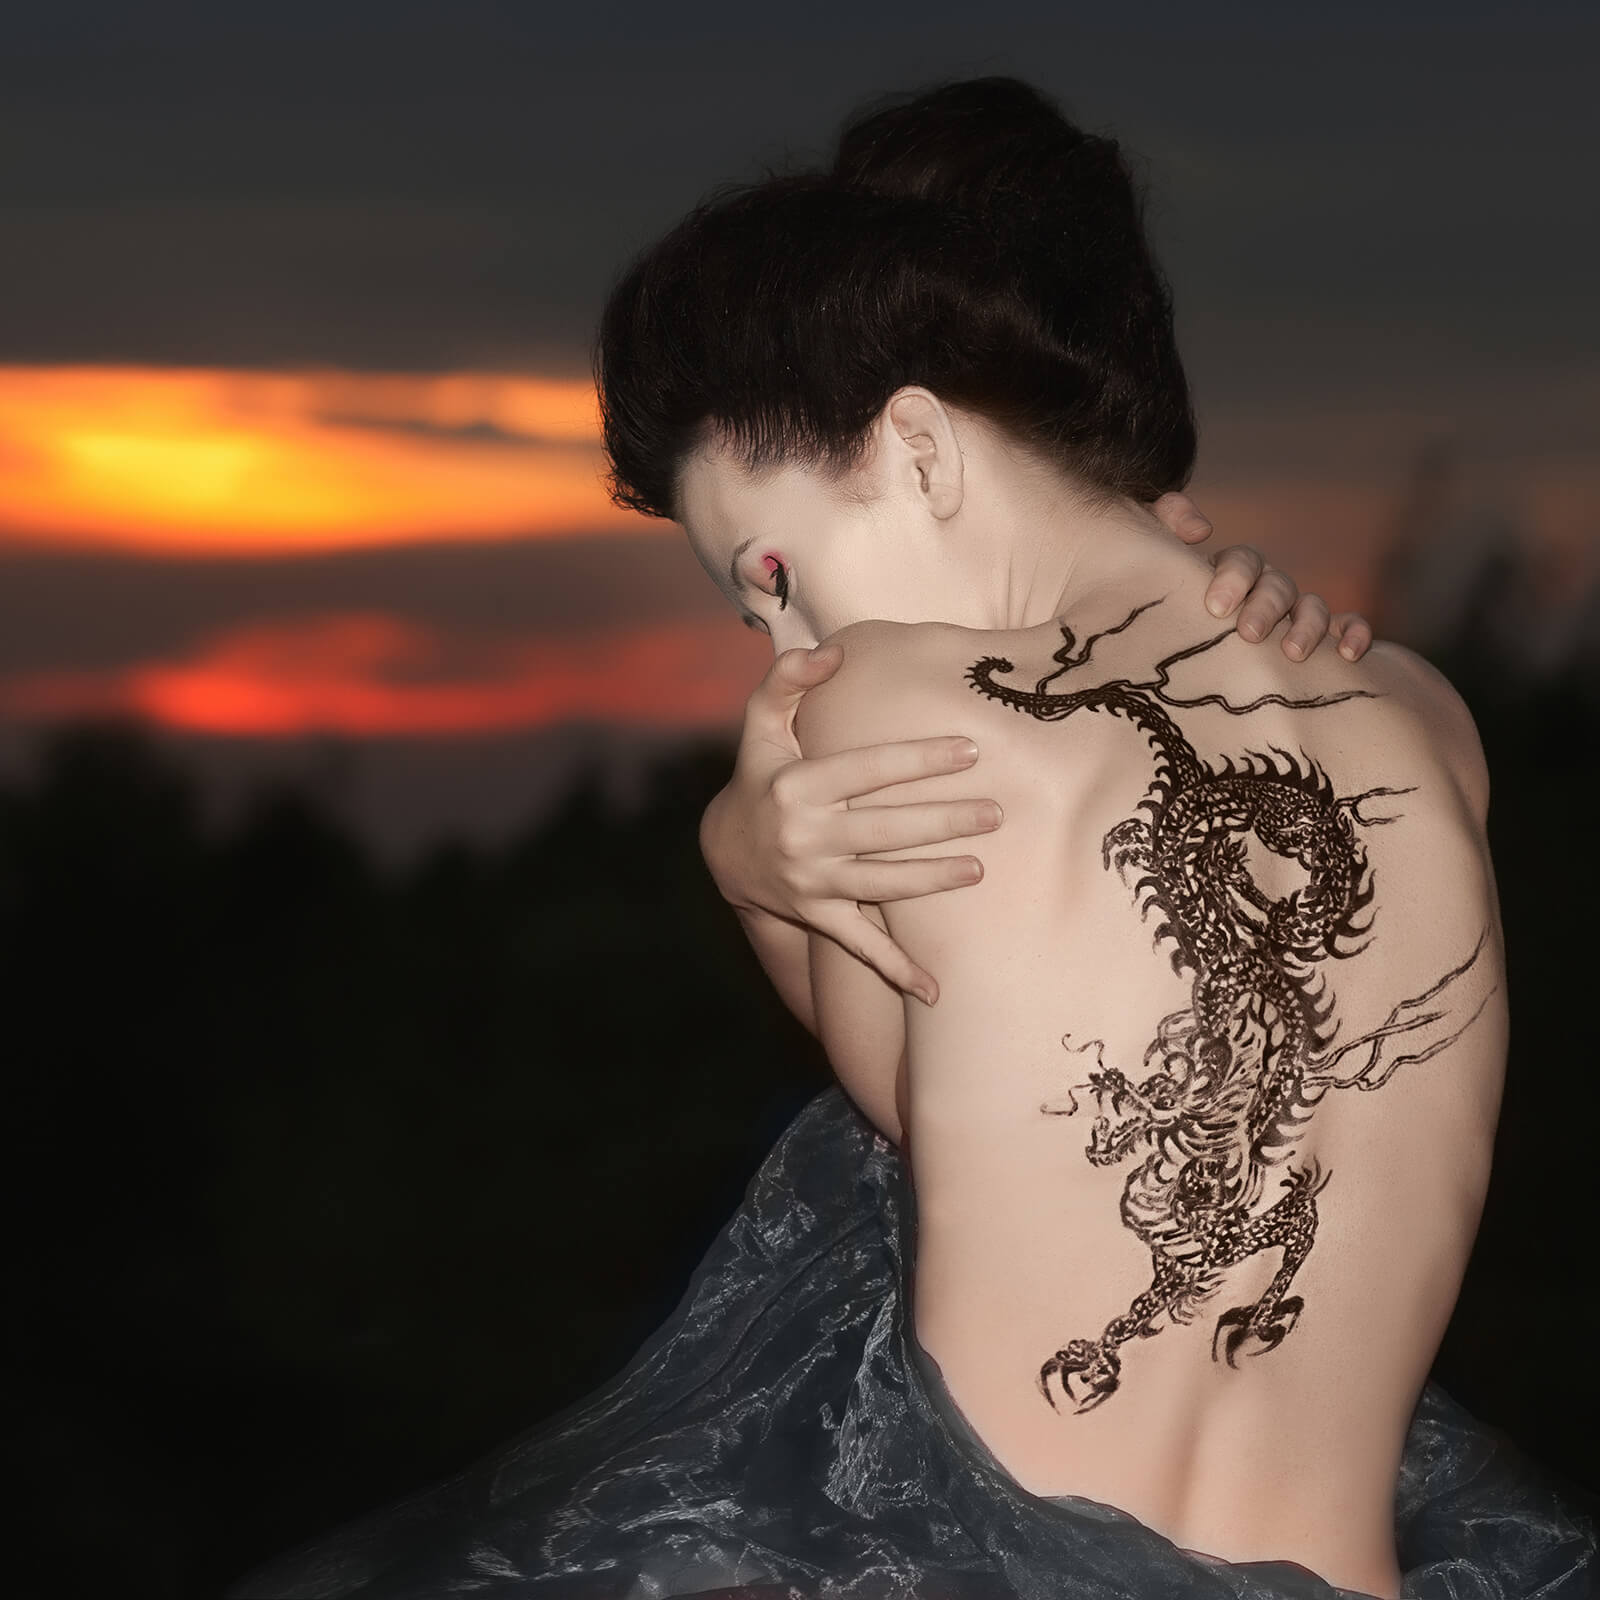 The Girl With The Dragon Tattoo Movie Tattoo